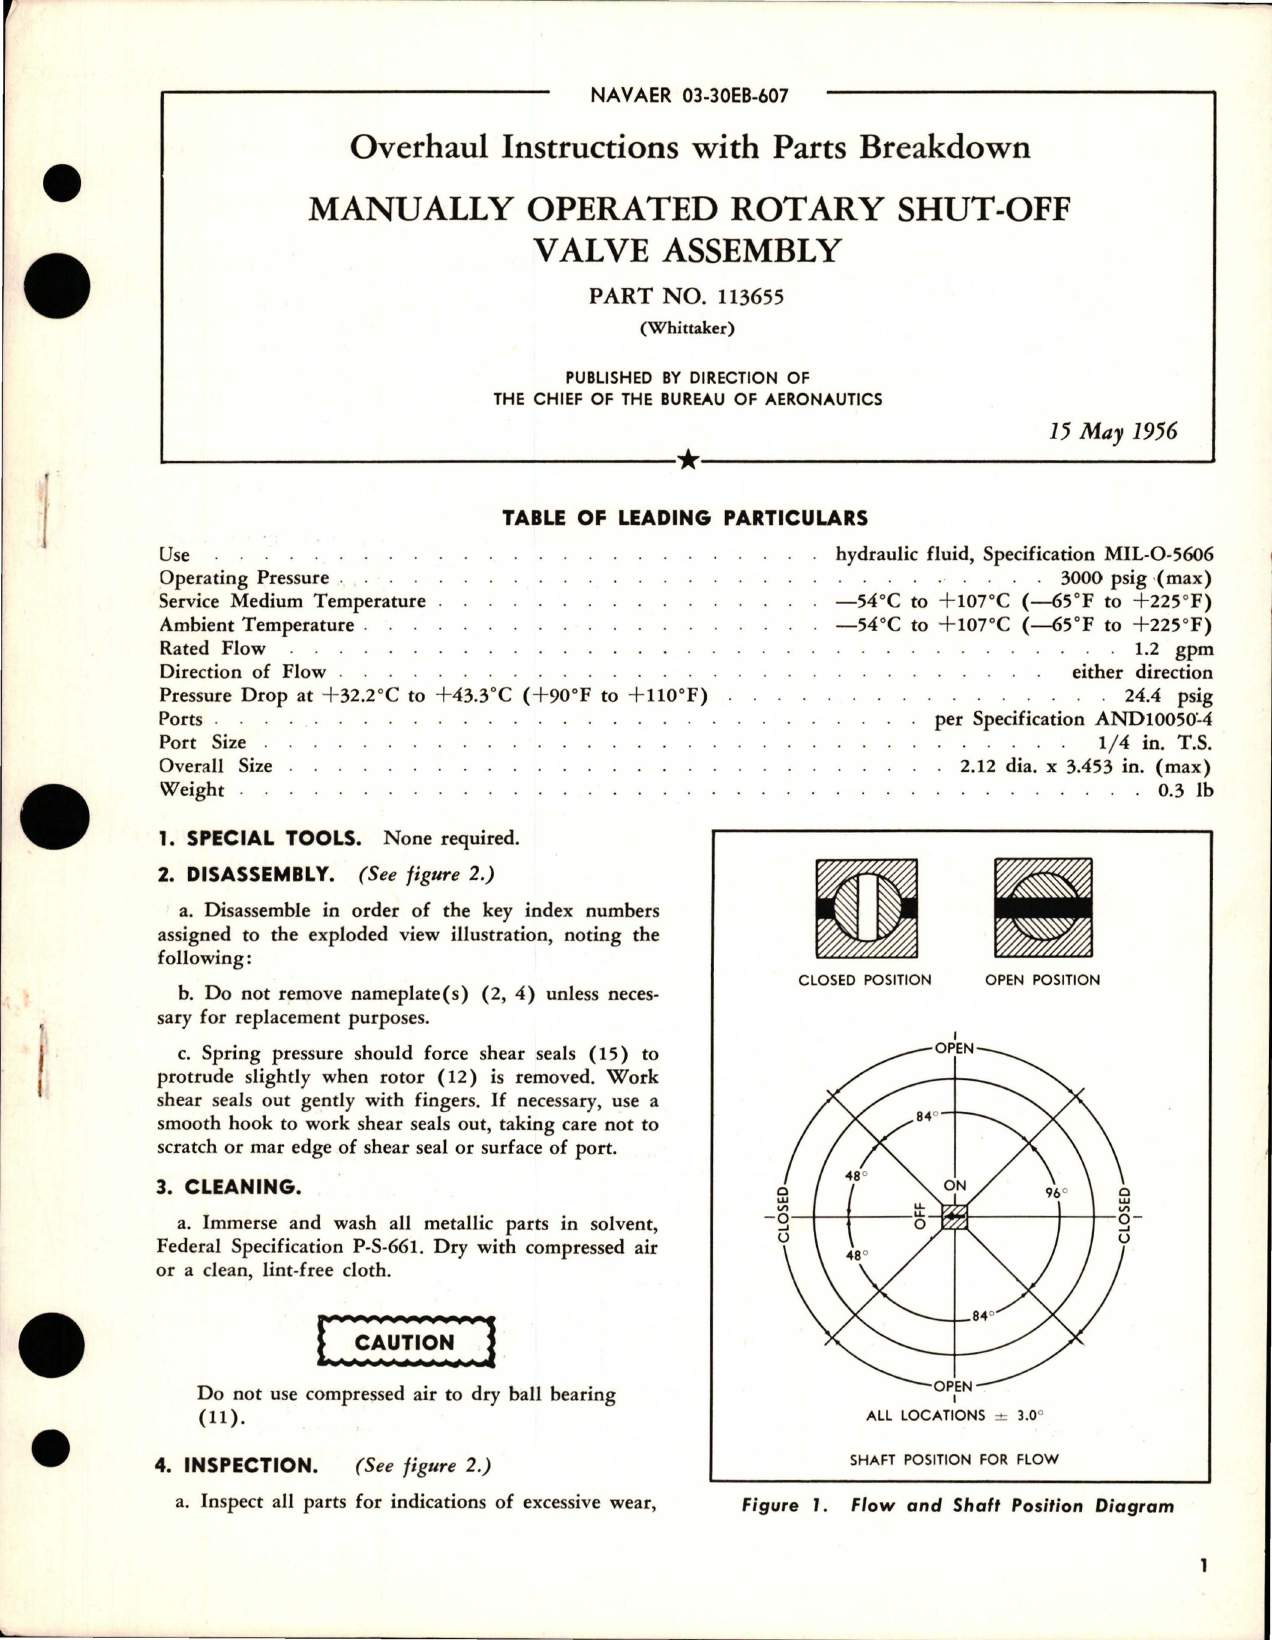 Sample page 1 from AirCorps Library document: Overhaul Instructions with Parts Breakdown for Manually Operated Rotary Shut-Off Valve Assembly - Part 113655